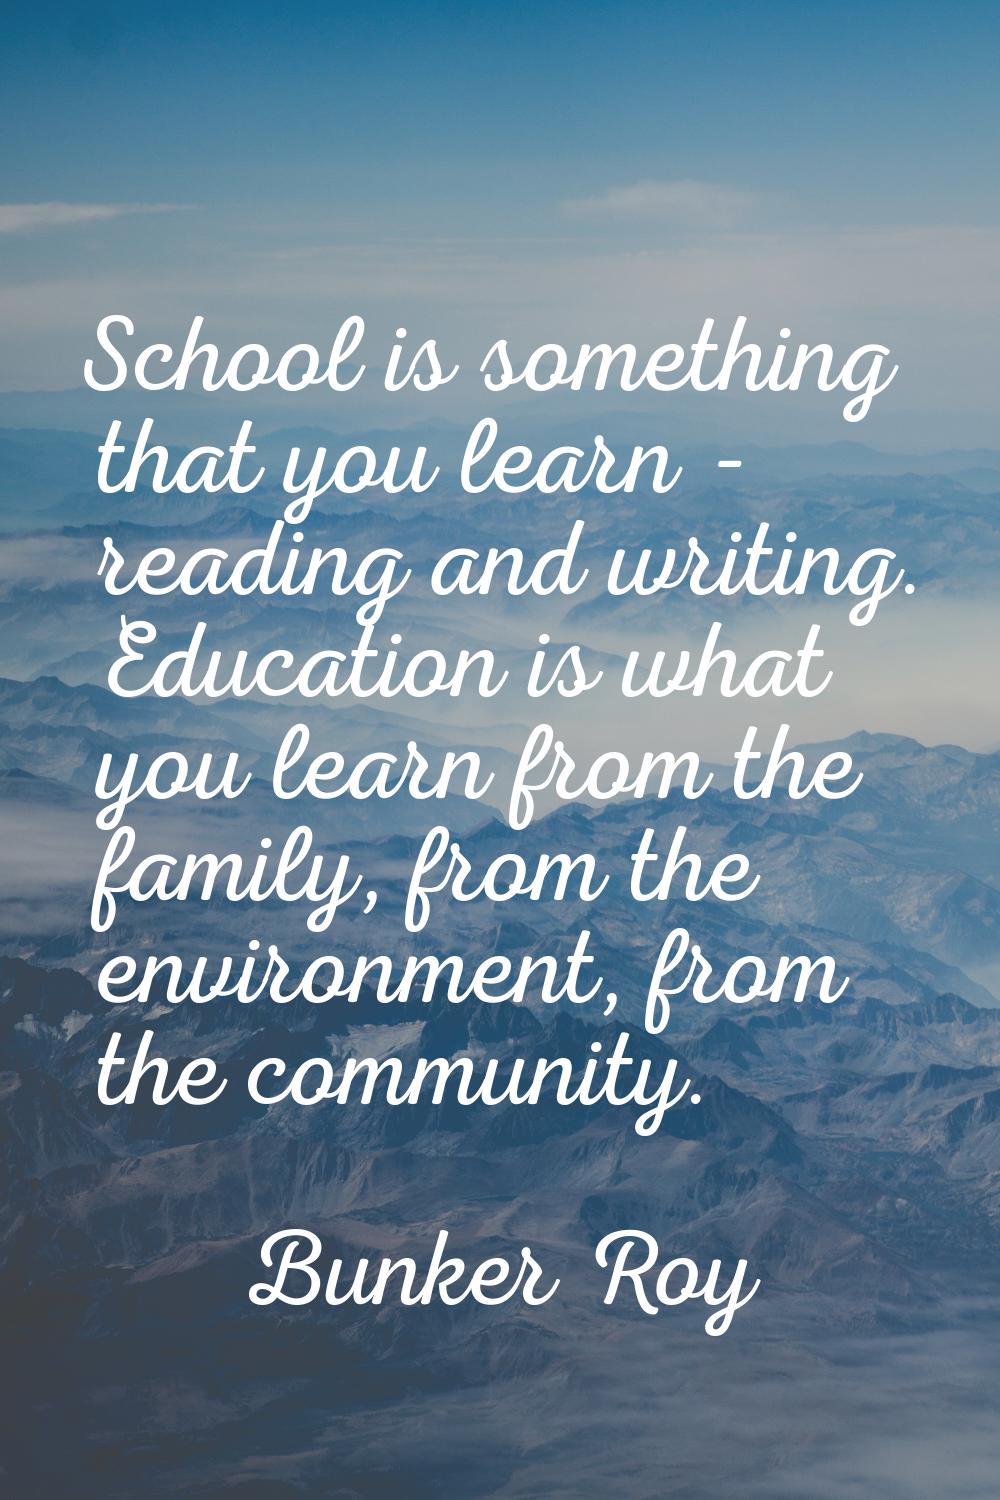 School is something that you learn - reading and writing. Education is what you learn from the fami